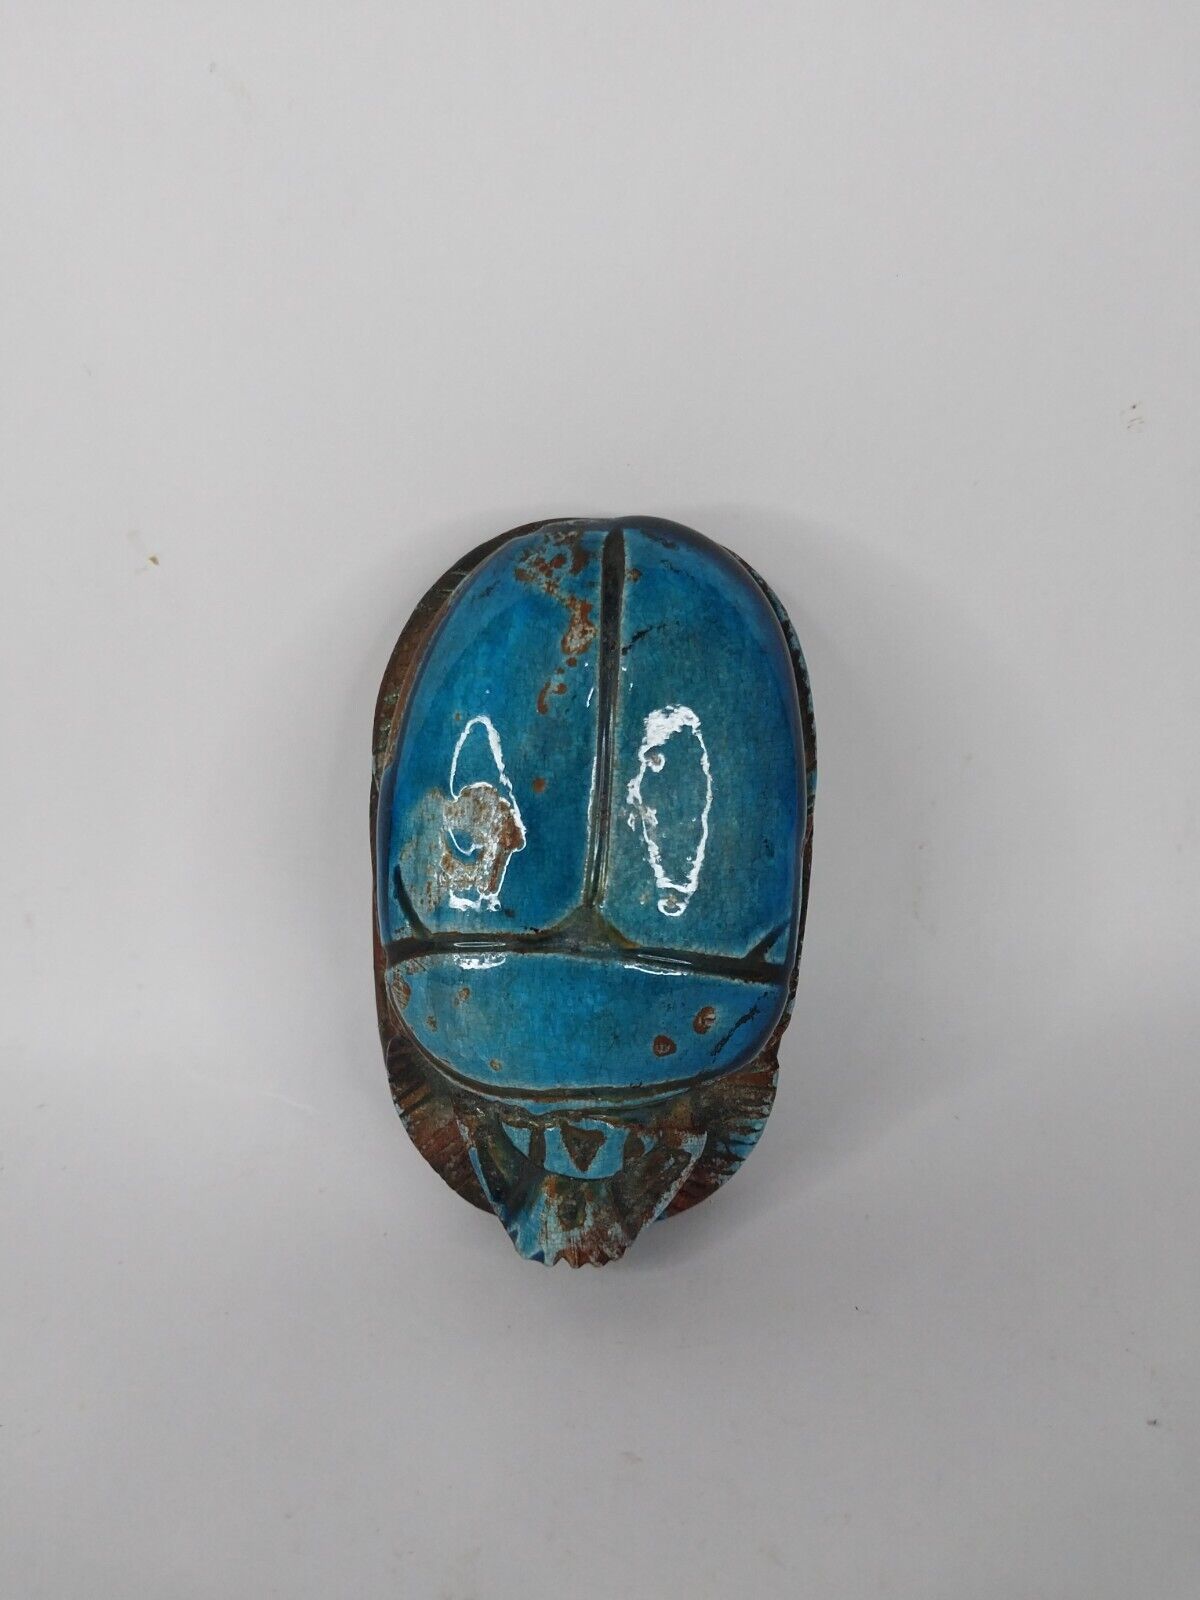 UNIQUE ANCIENT EGYPTIAN ANTIQUE Small Stone Blue Scarab Beetle Luck Hieroglyphic